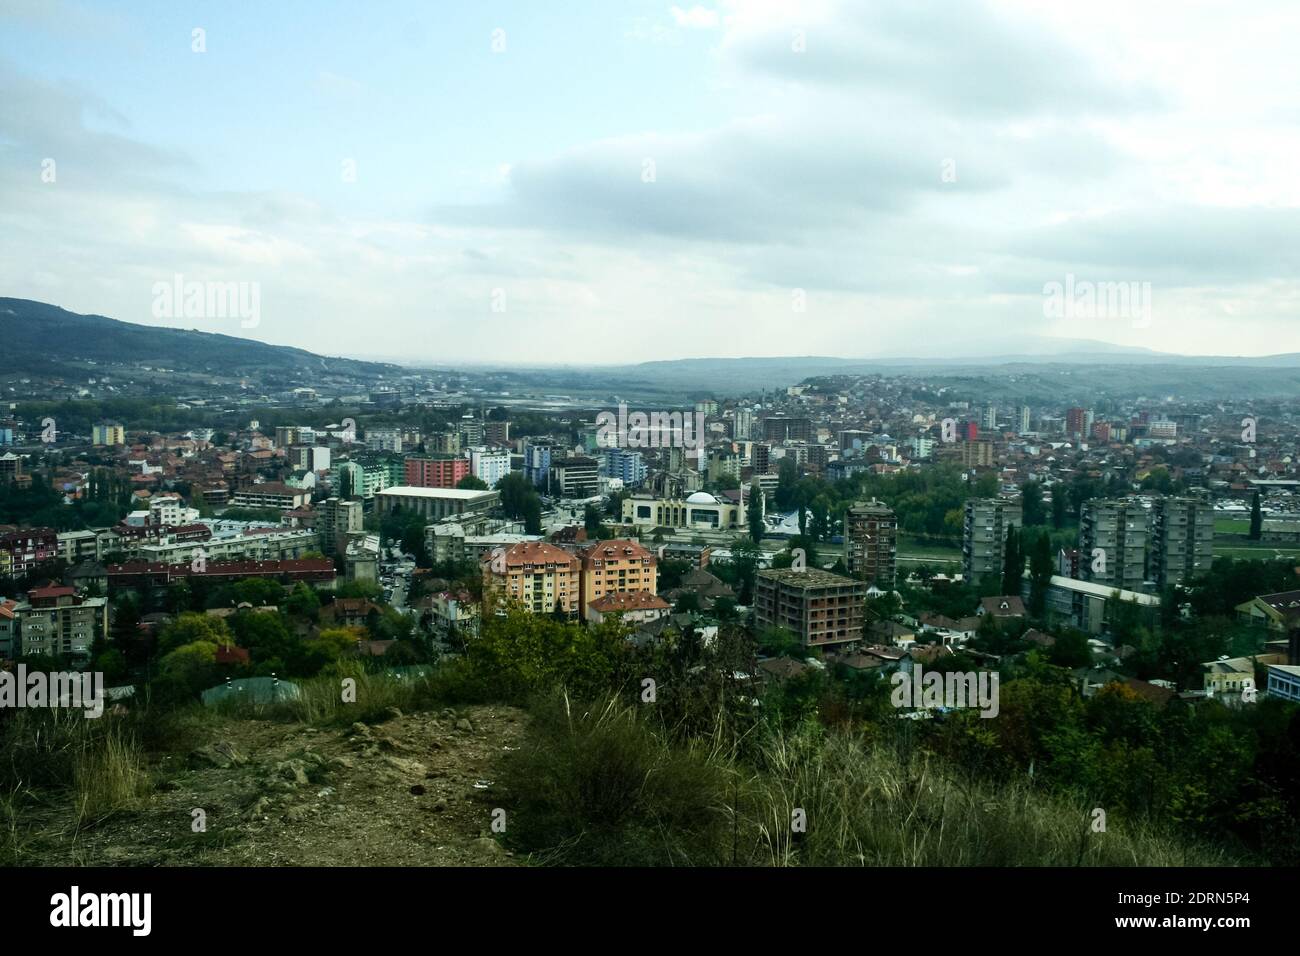 panorama ofNorth Mitrovica, the serbian part of the town, with South mitrovica in background, It is a symbol of the division between albanians and ser Stock Photo